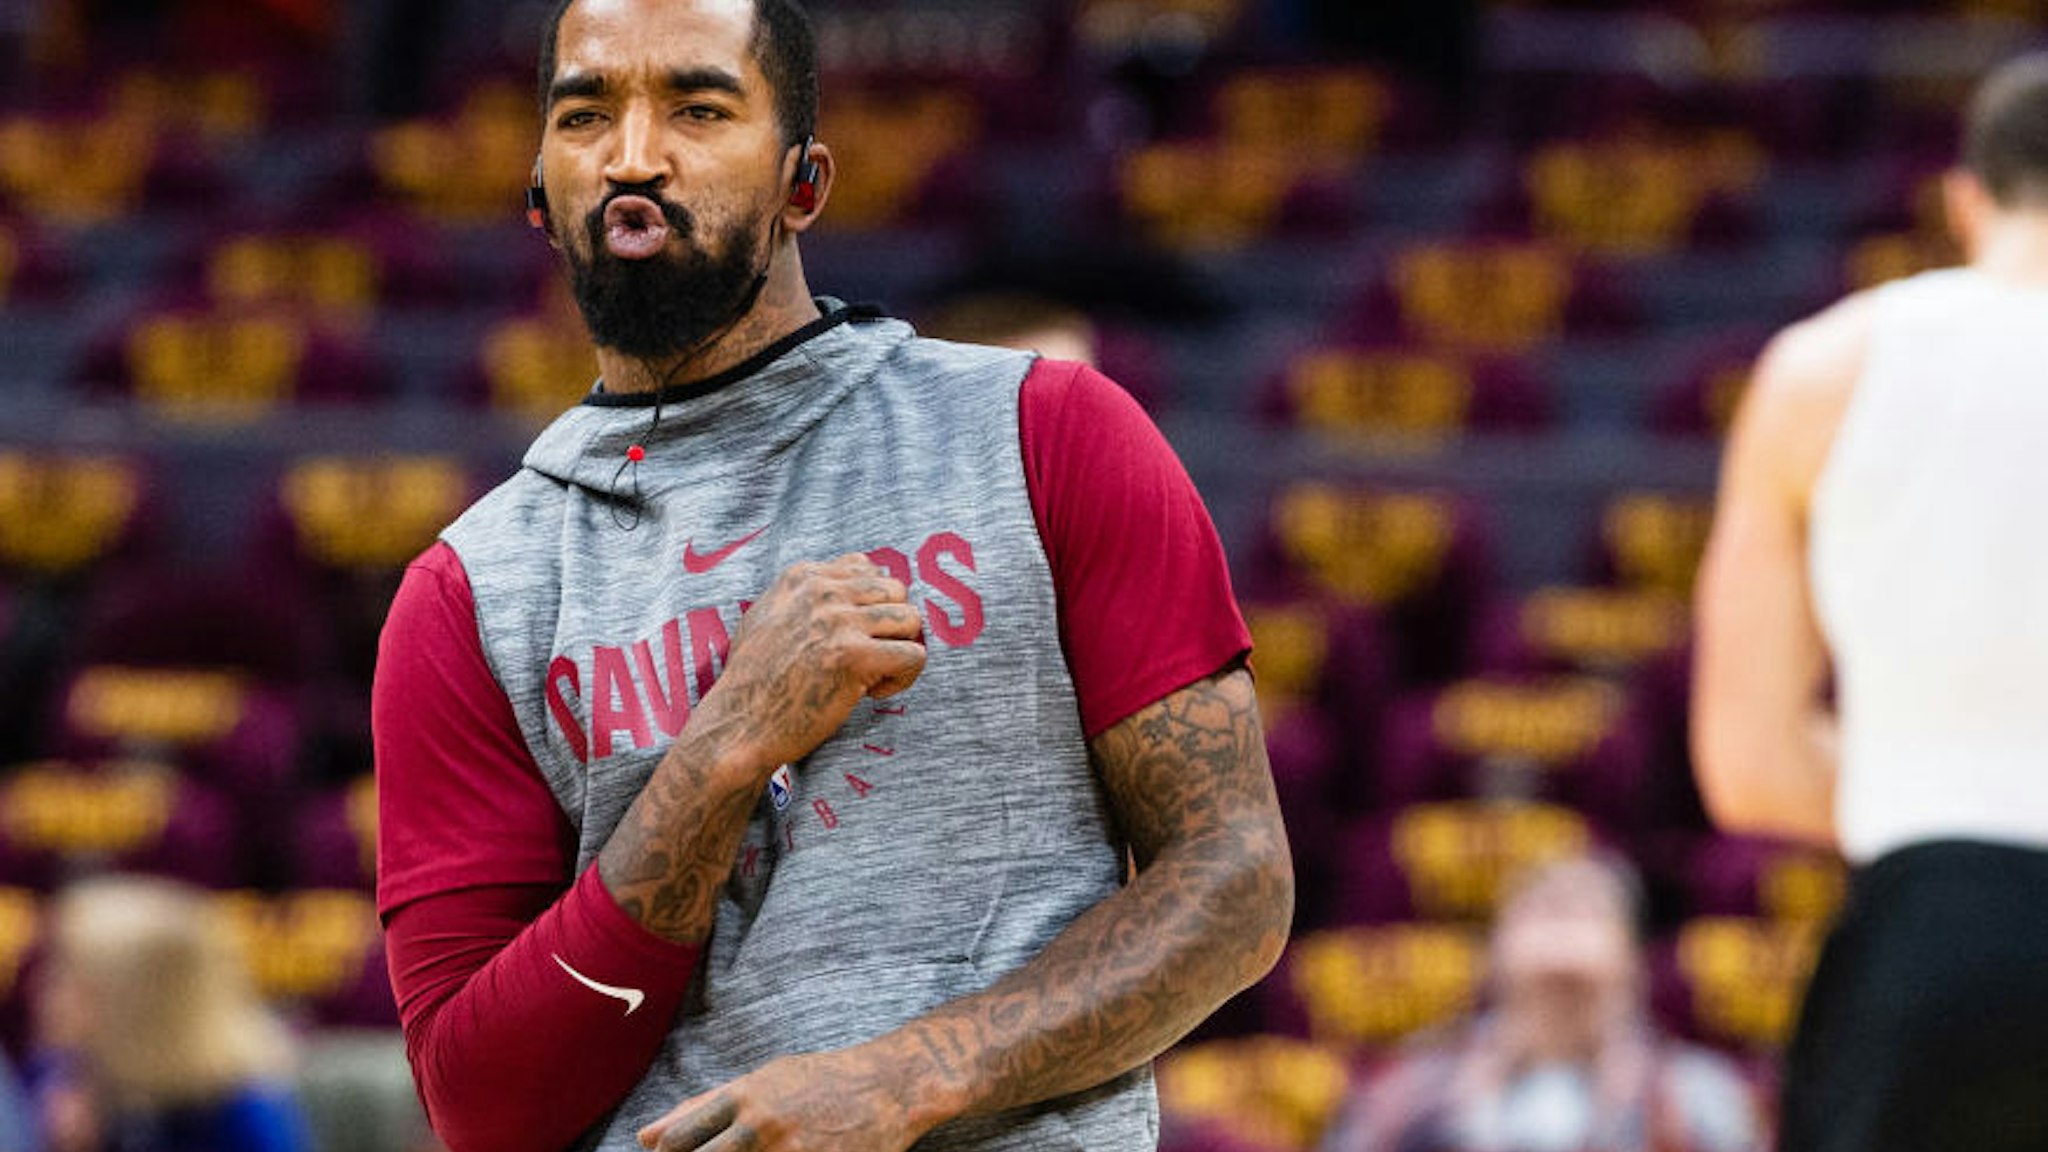 JR Smith #5 of the Cleveland Cavaliers reacts after narrowly missing a half court shot during warms ups prior to the game against the Atlanta Hawks at Quicken Loans Arena on October 21, 2018 in Cleveland, Ohio.